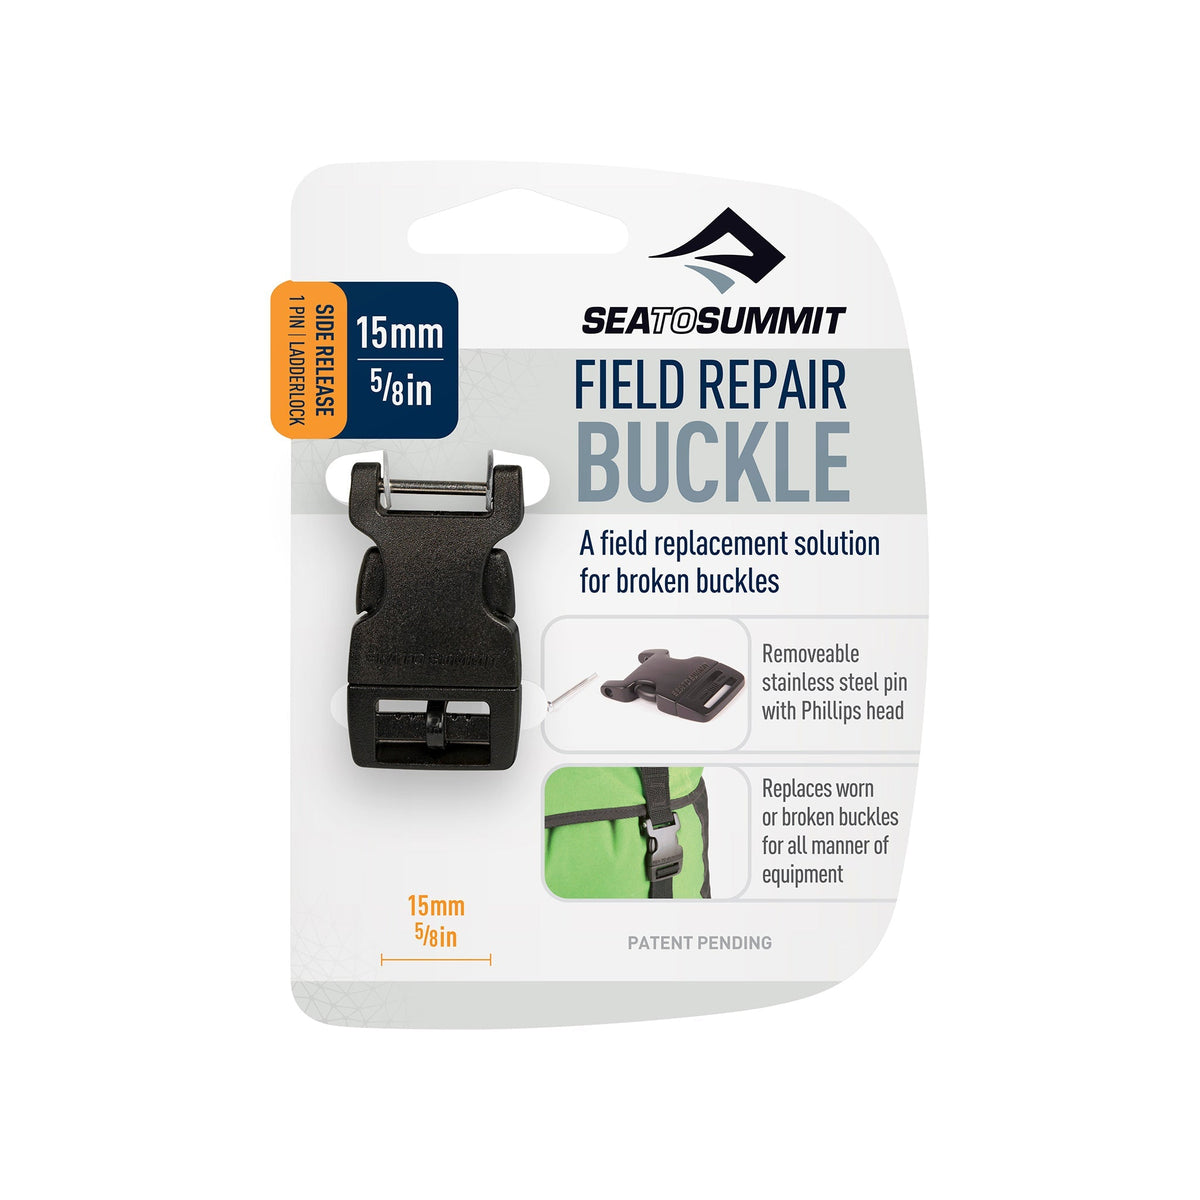 15mm || Side Release Field Repair Buckle with Removable Pin